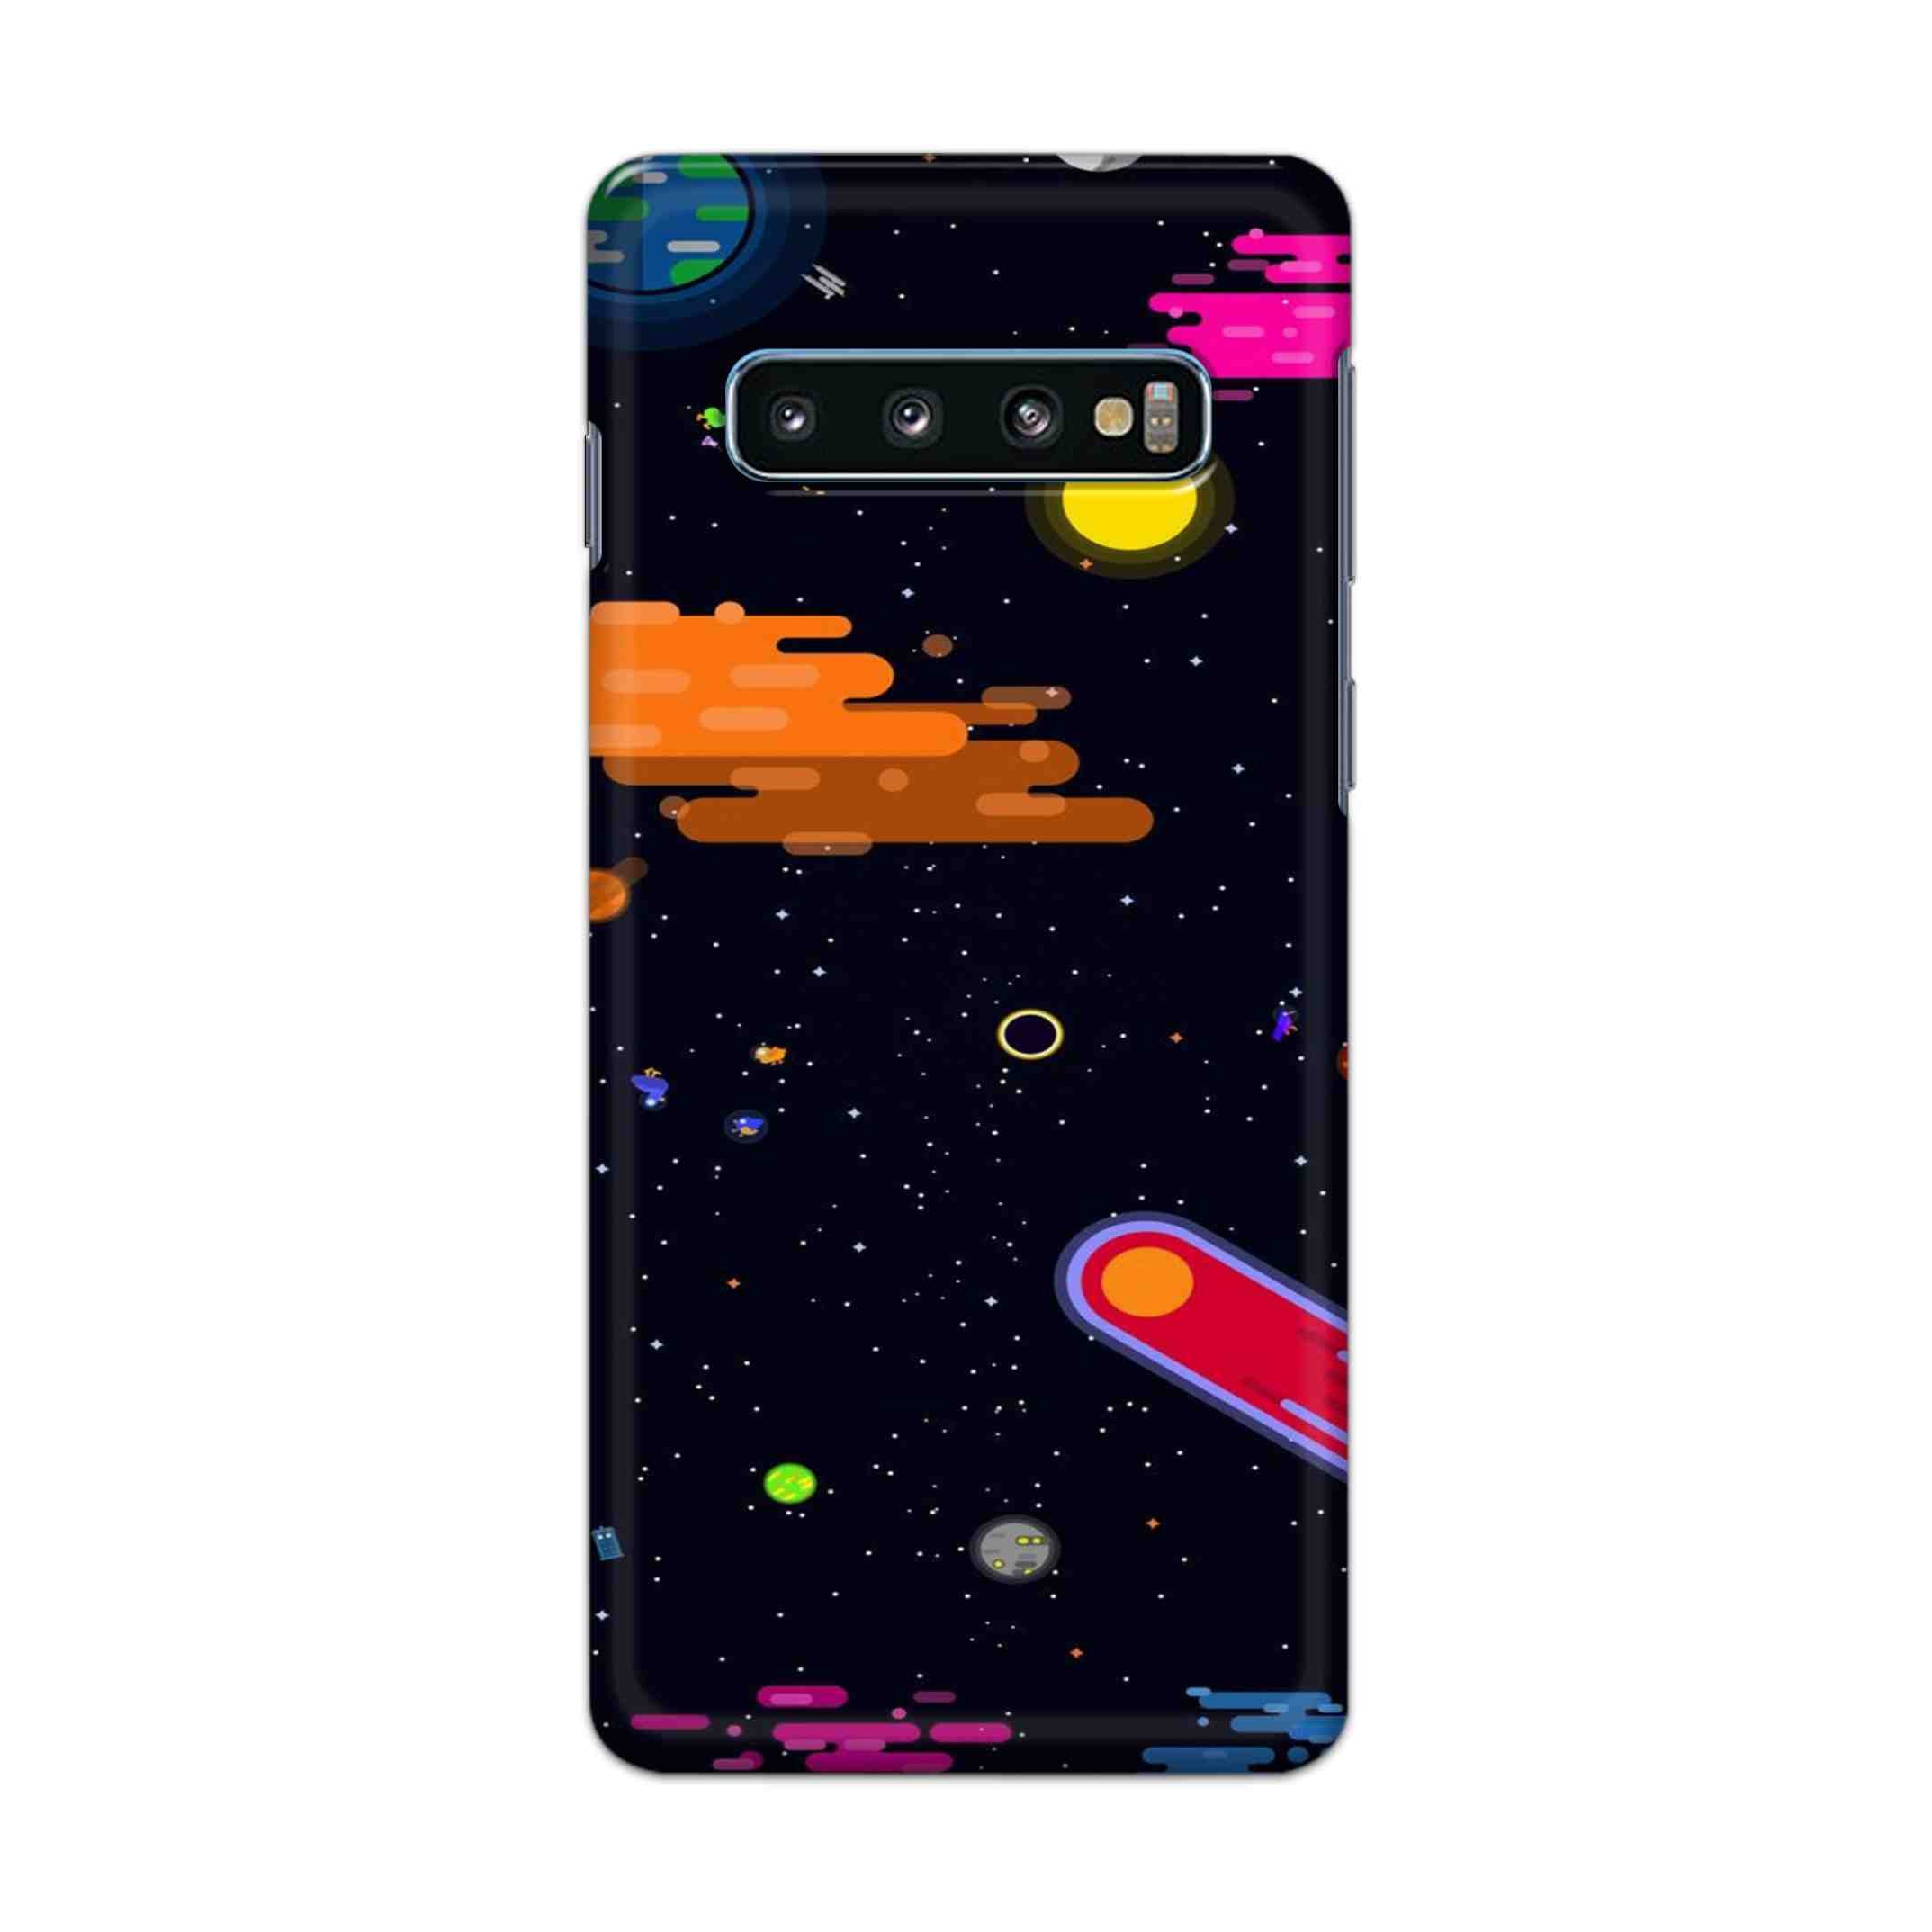 Buy Art Space Hard Back Mobile Phone Case Cover For Samsung Galaxy S10 Plus Online